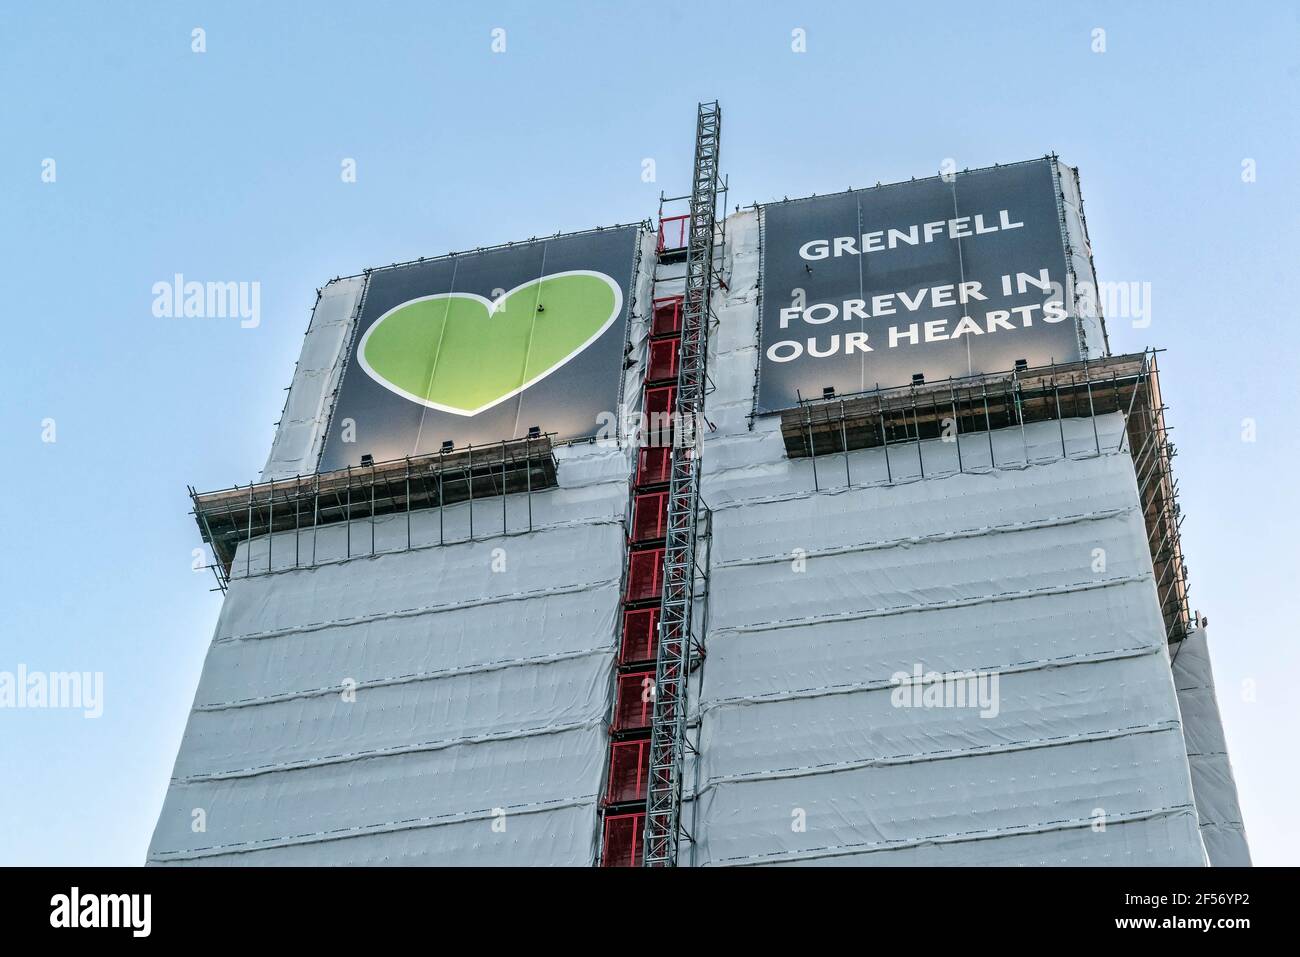 Grenfell tower cover in white tarpaulin, with the green heart logo and inscription above, stands tall against a blue sky. Stock Photo